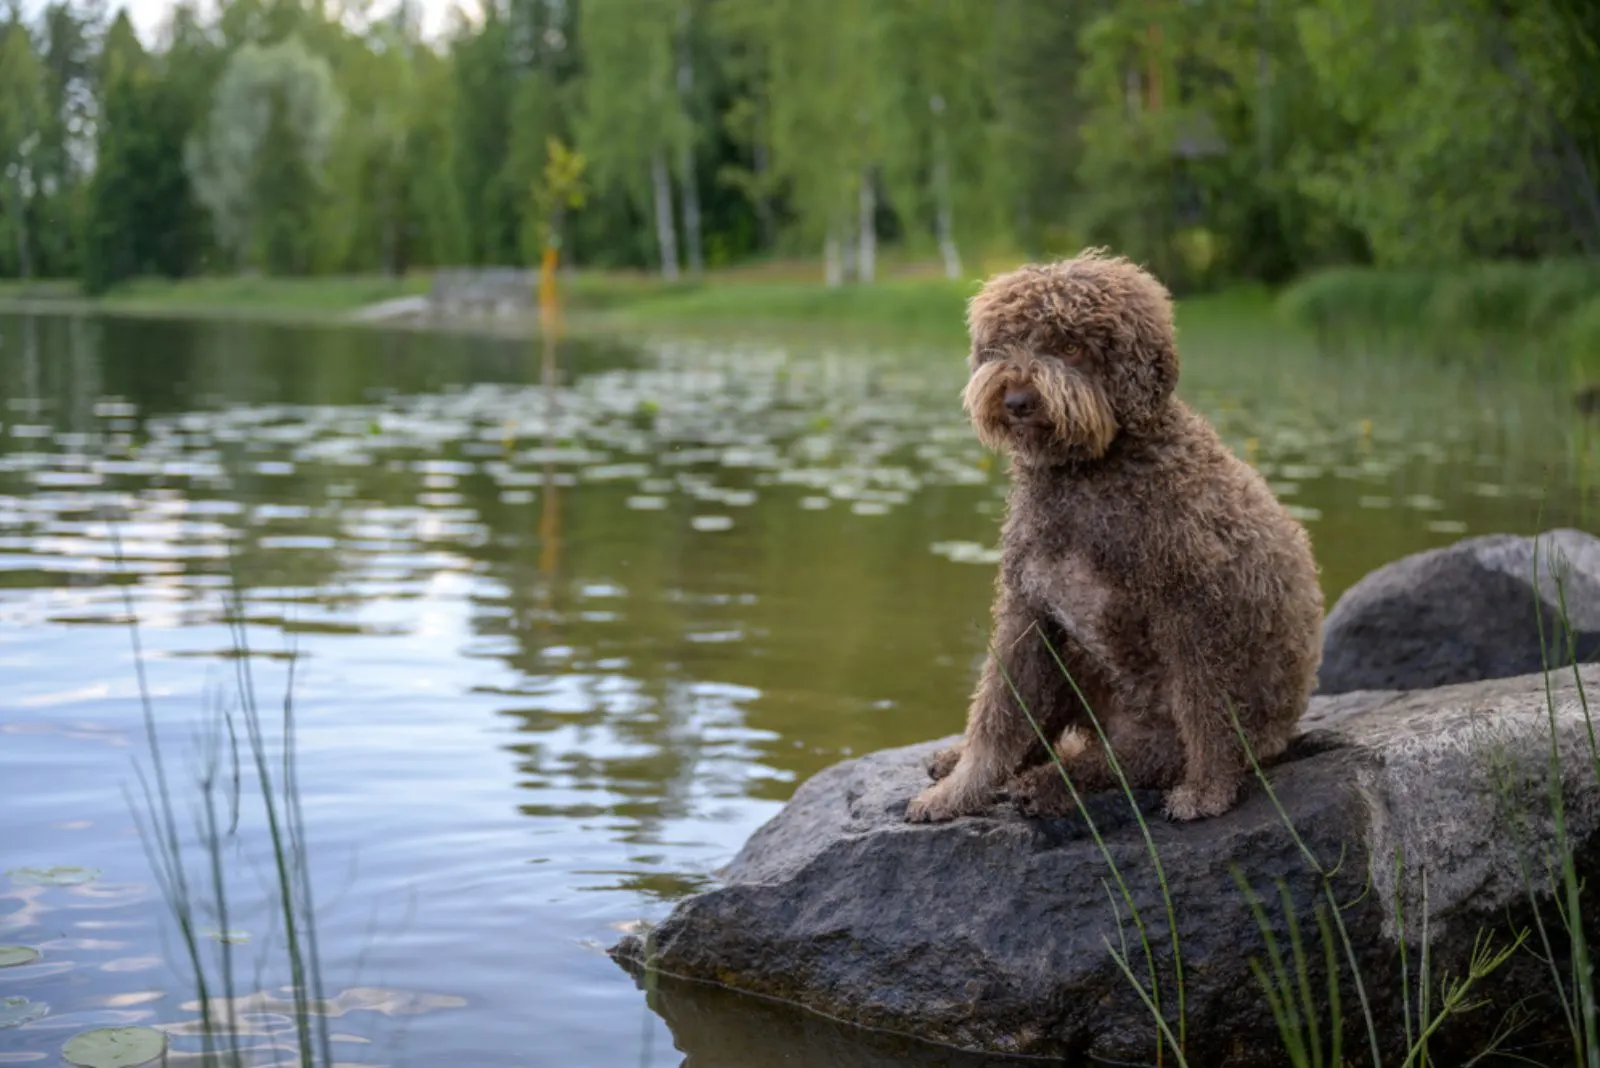 Lagotto Romagnolo sitting on a rock